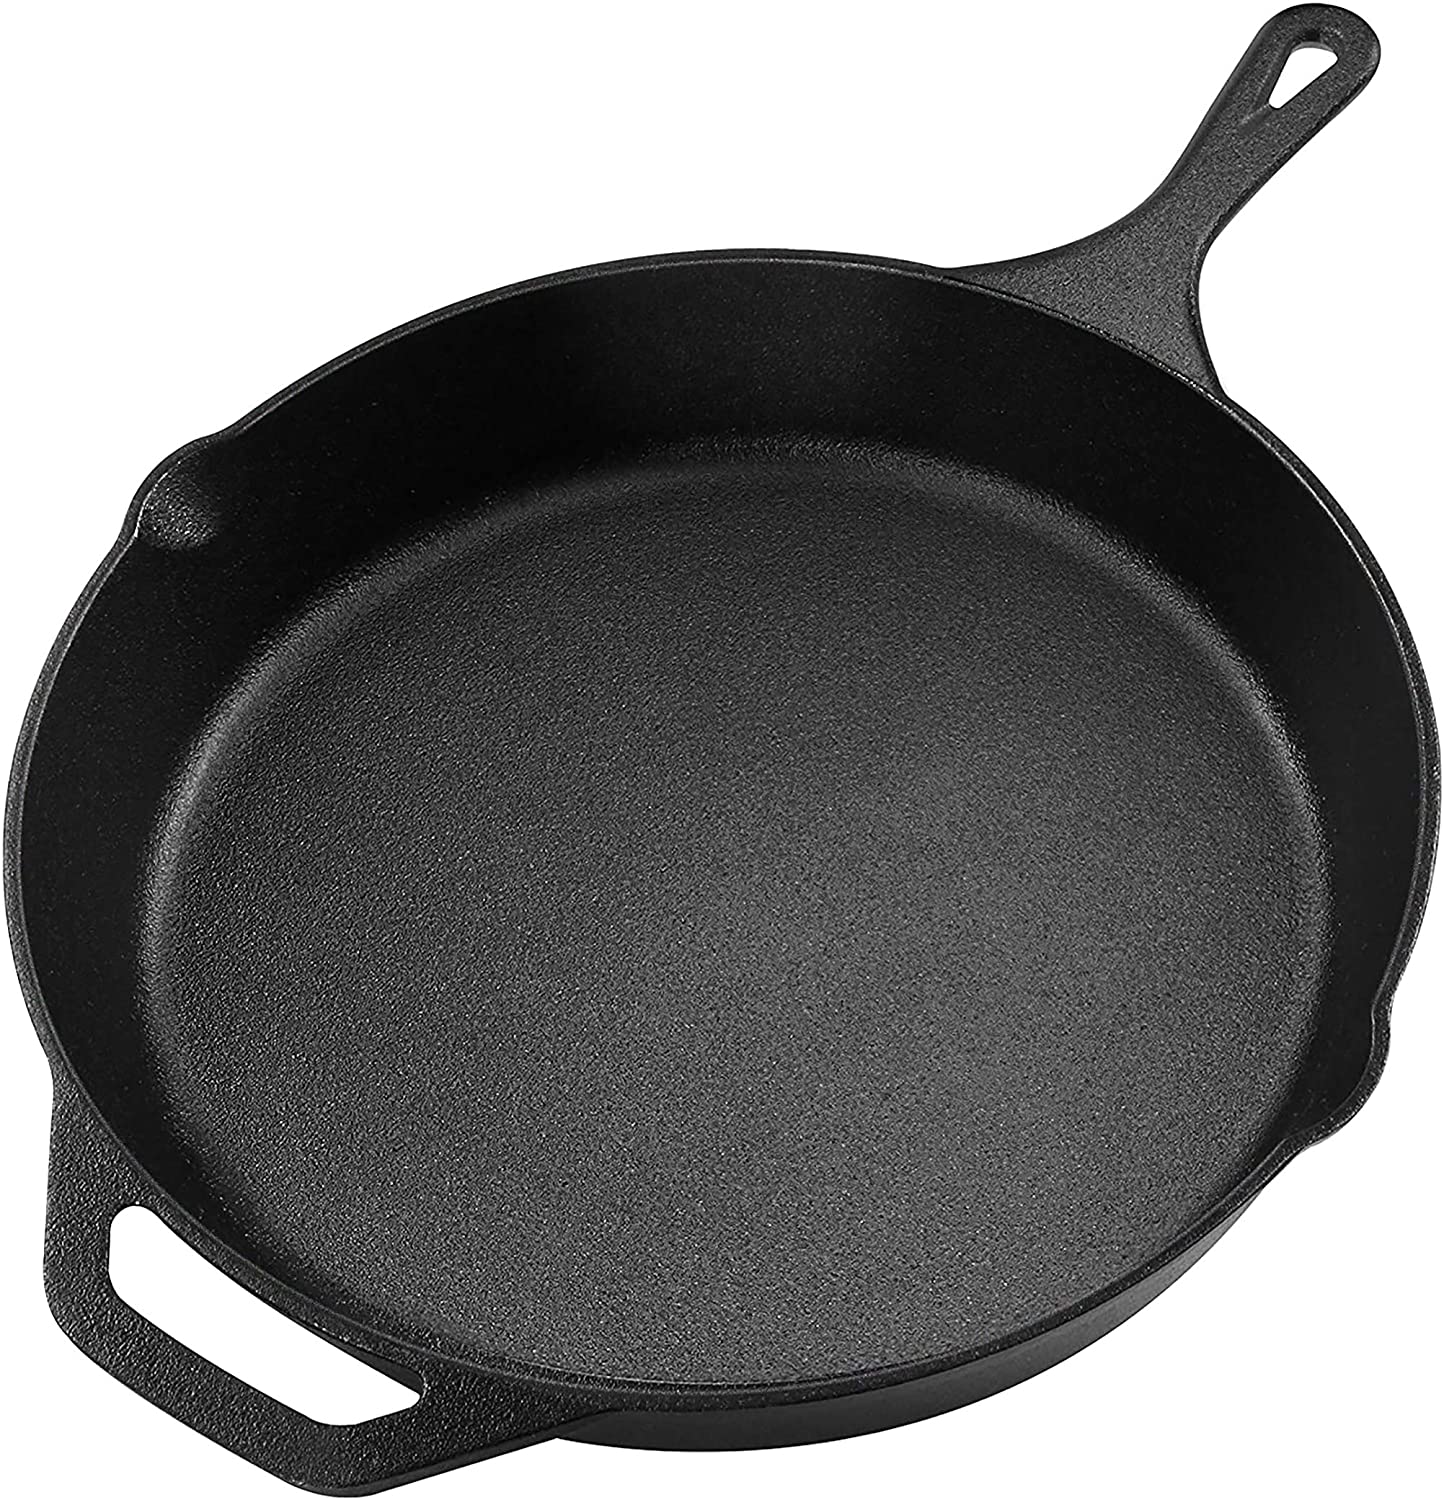 cooking-gifts-cast-iron-skillet